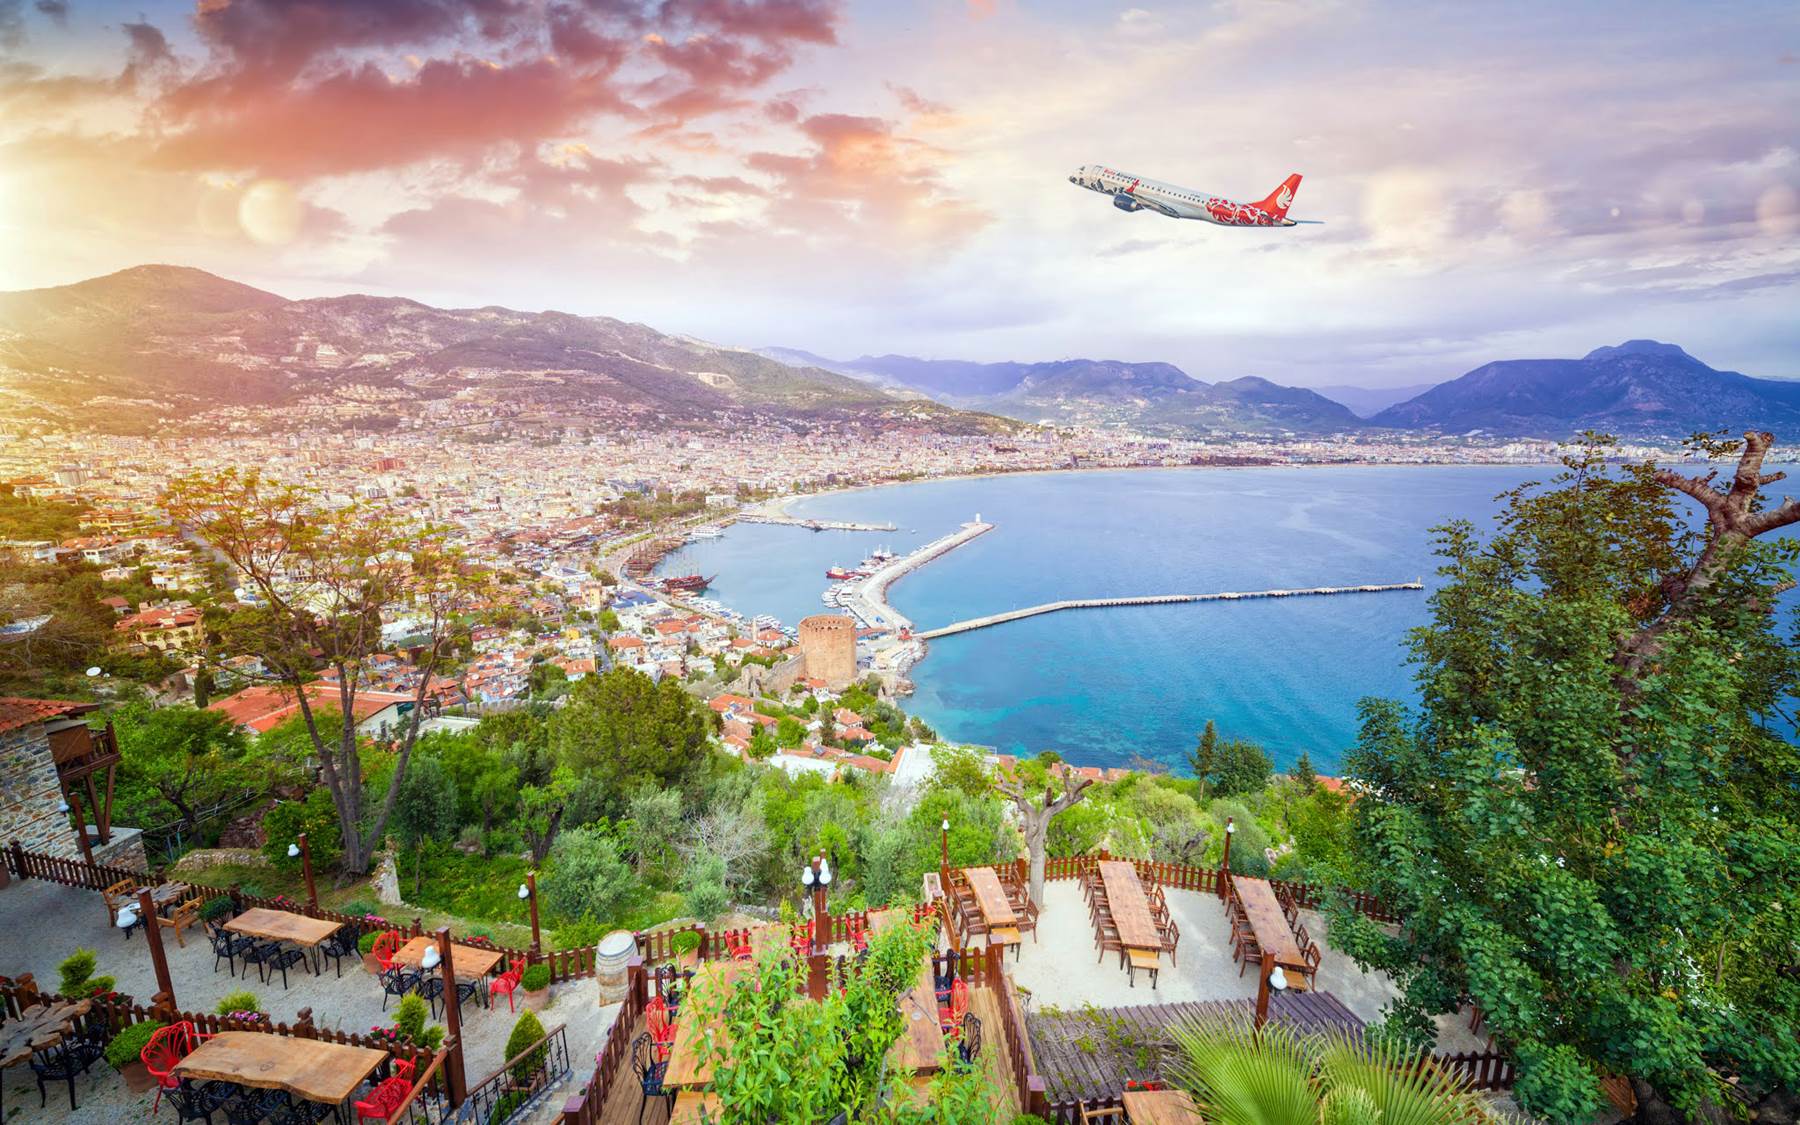 What is Alanya known for?